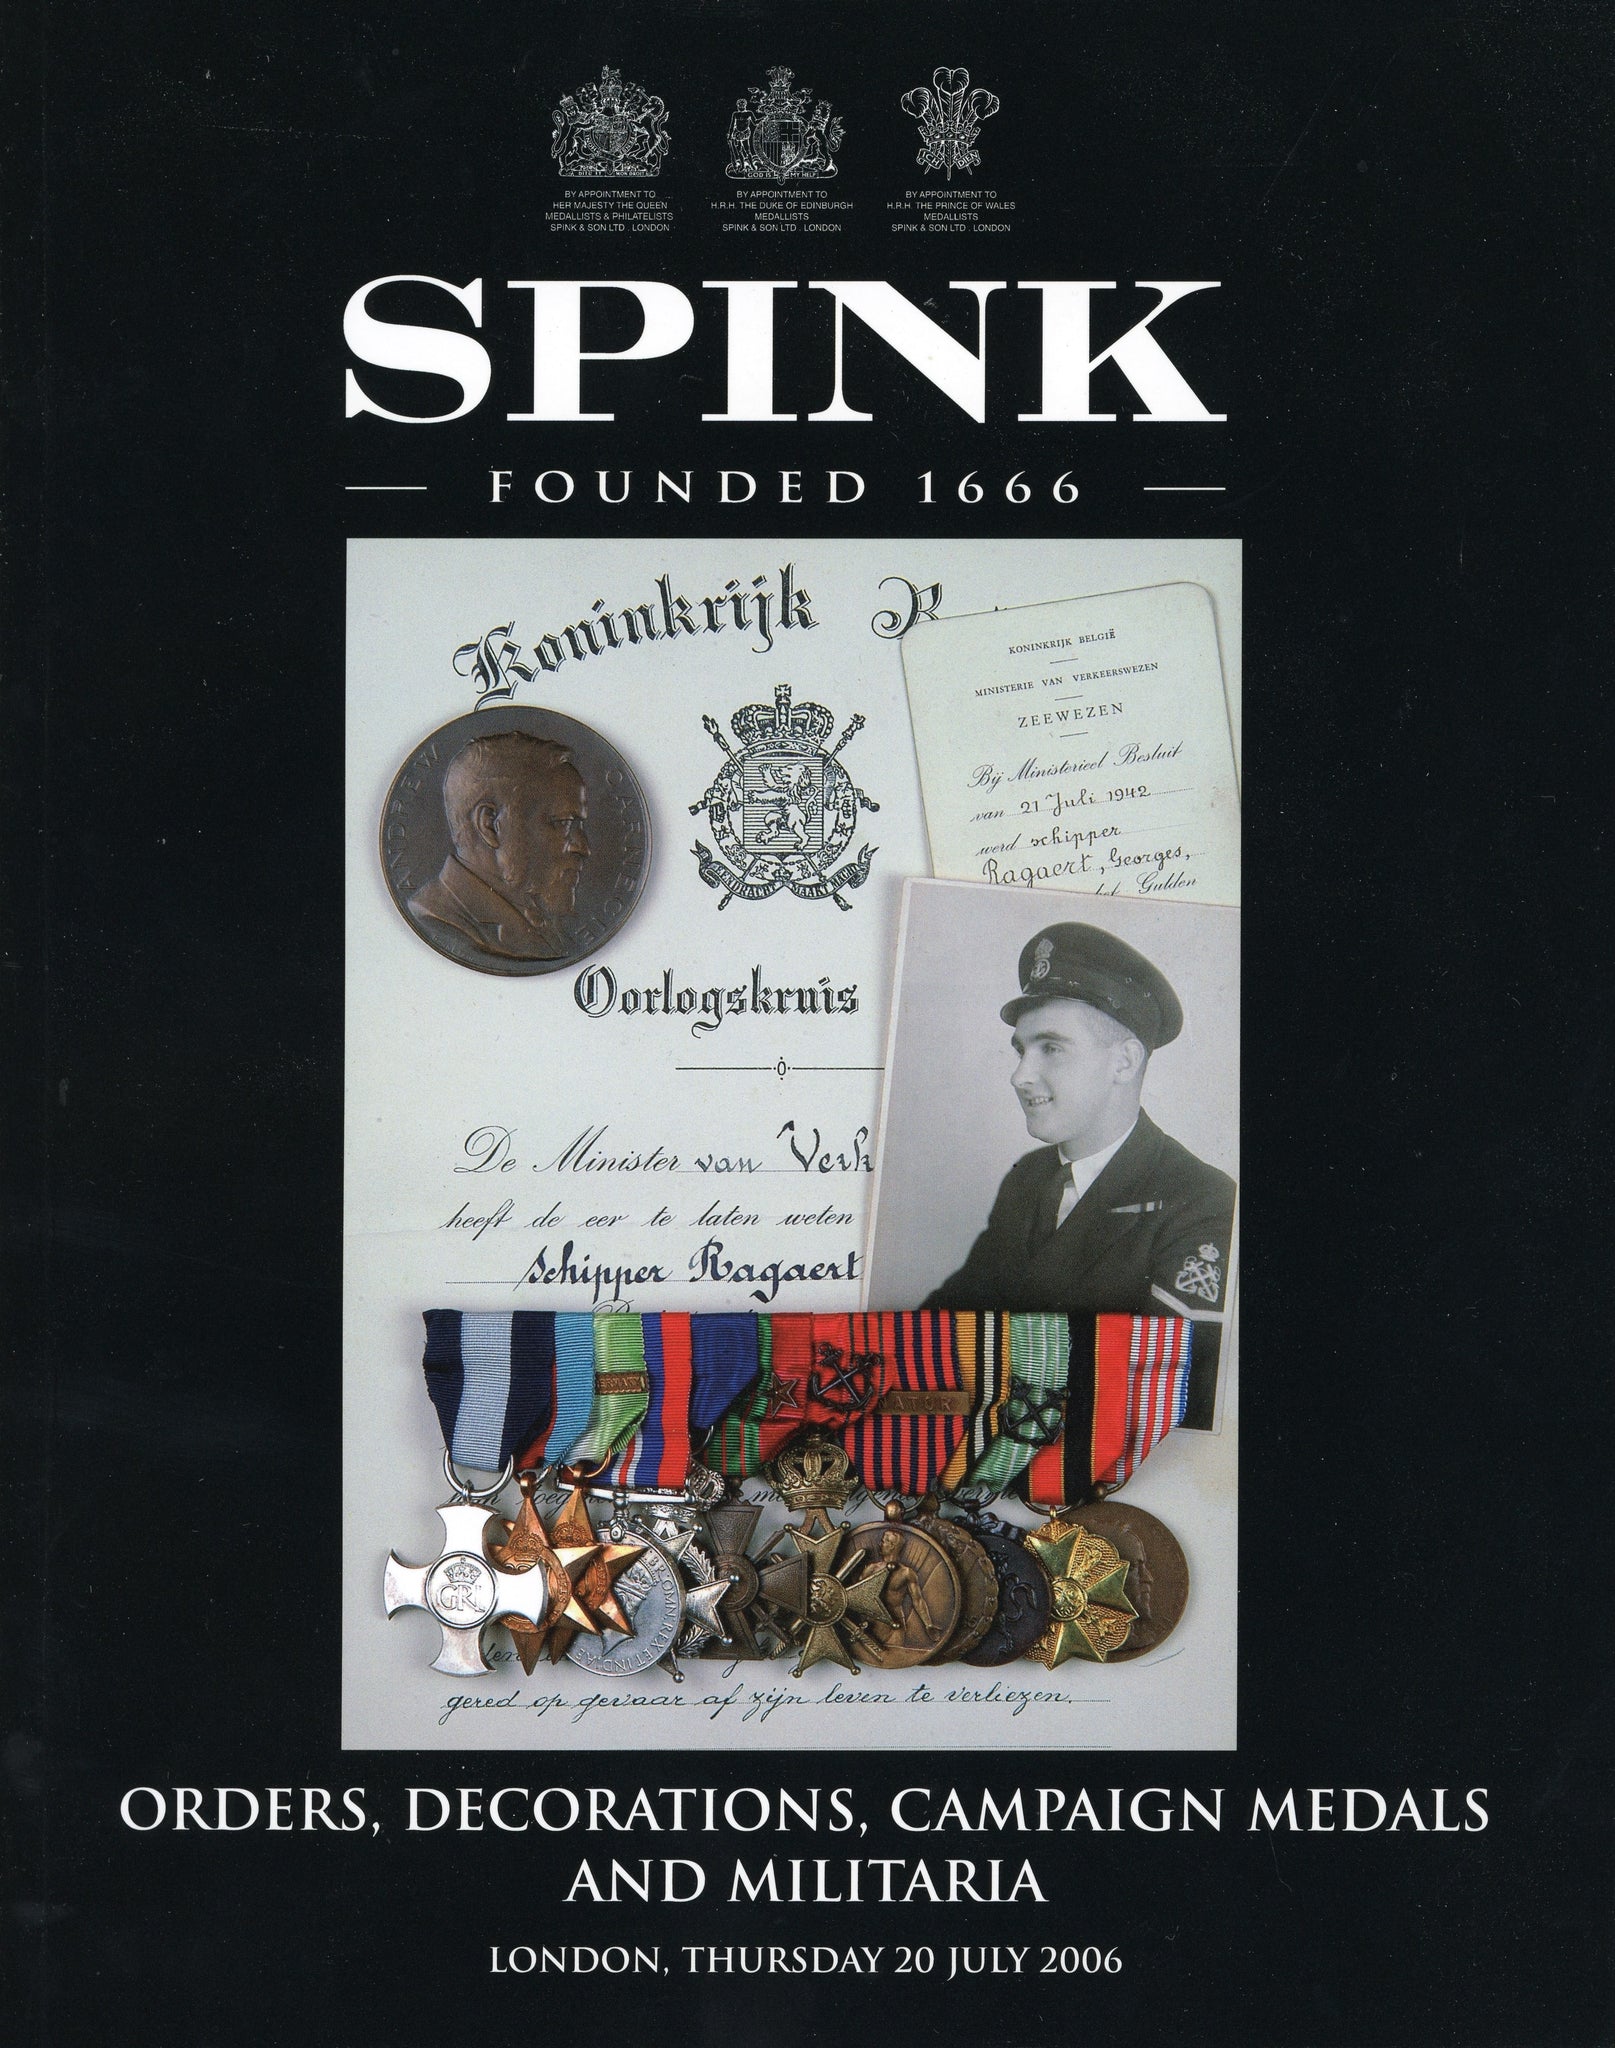 Orders, Decorations, Campaign Medals and Militaria - 20 July 2006 - Spink London